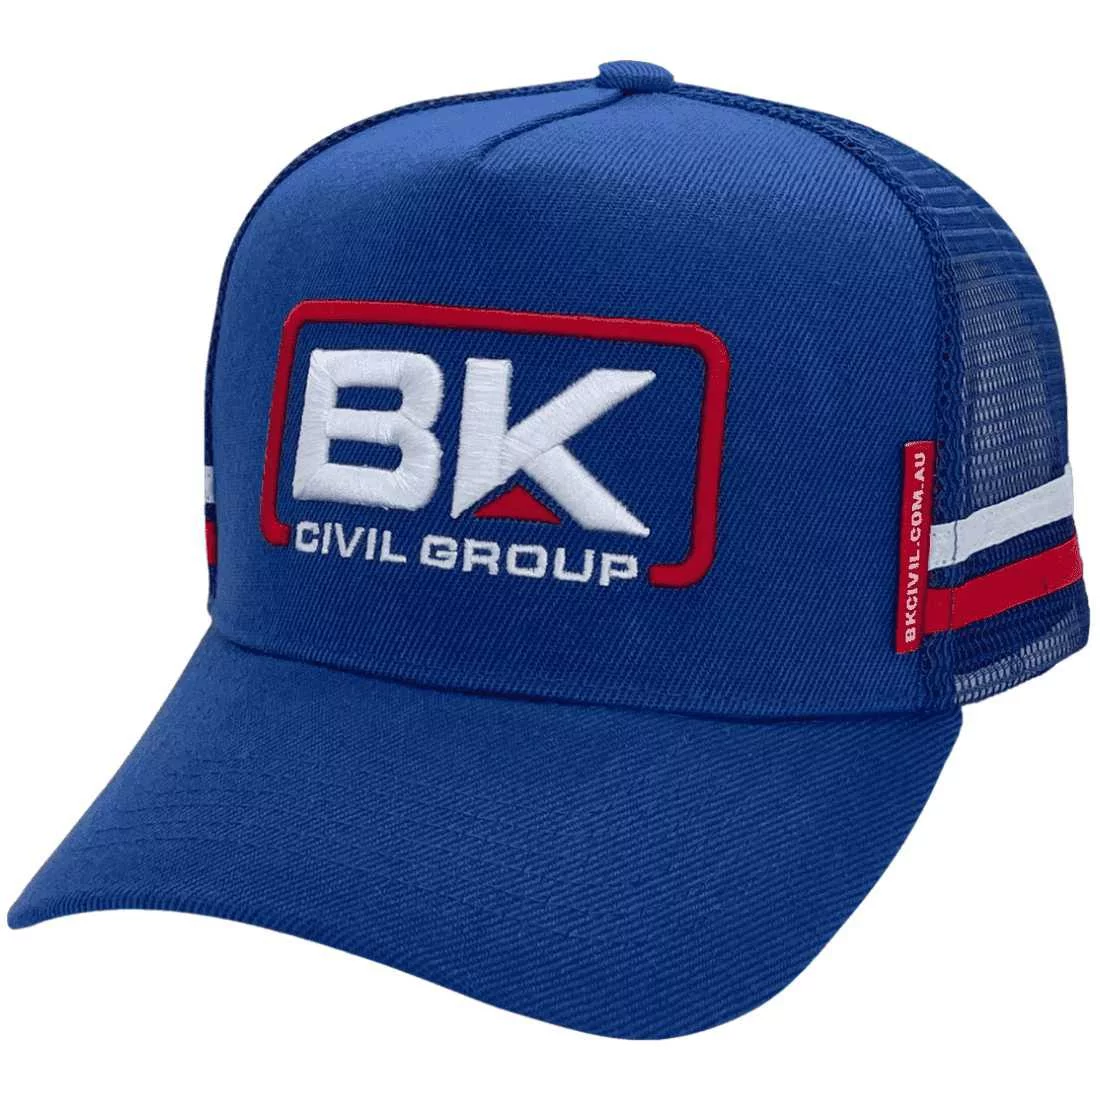 BK Civil Group Cambooya QLD HP Original Basic Aussie Trucker Hat with double sidebands Acrylic Royal White Red                c